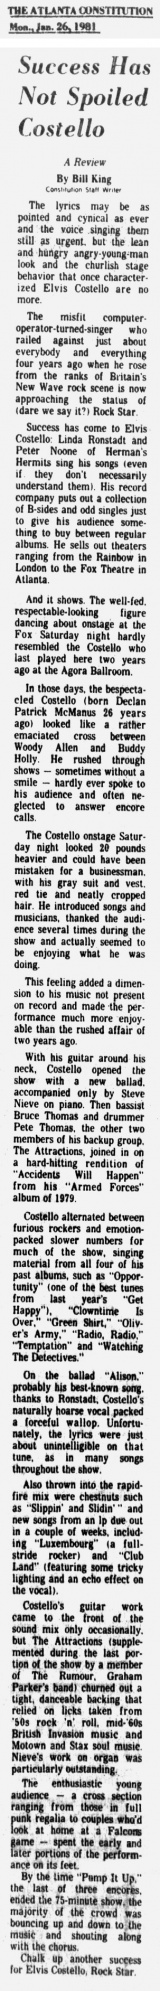 1981-01-26 Atlanta Journal-Constitution page 5-B clipping 01.jpg